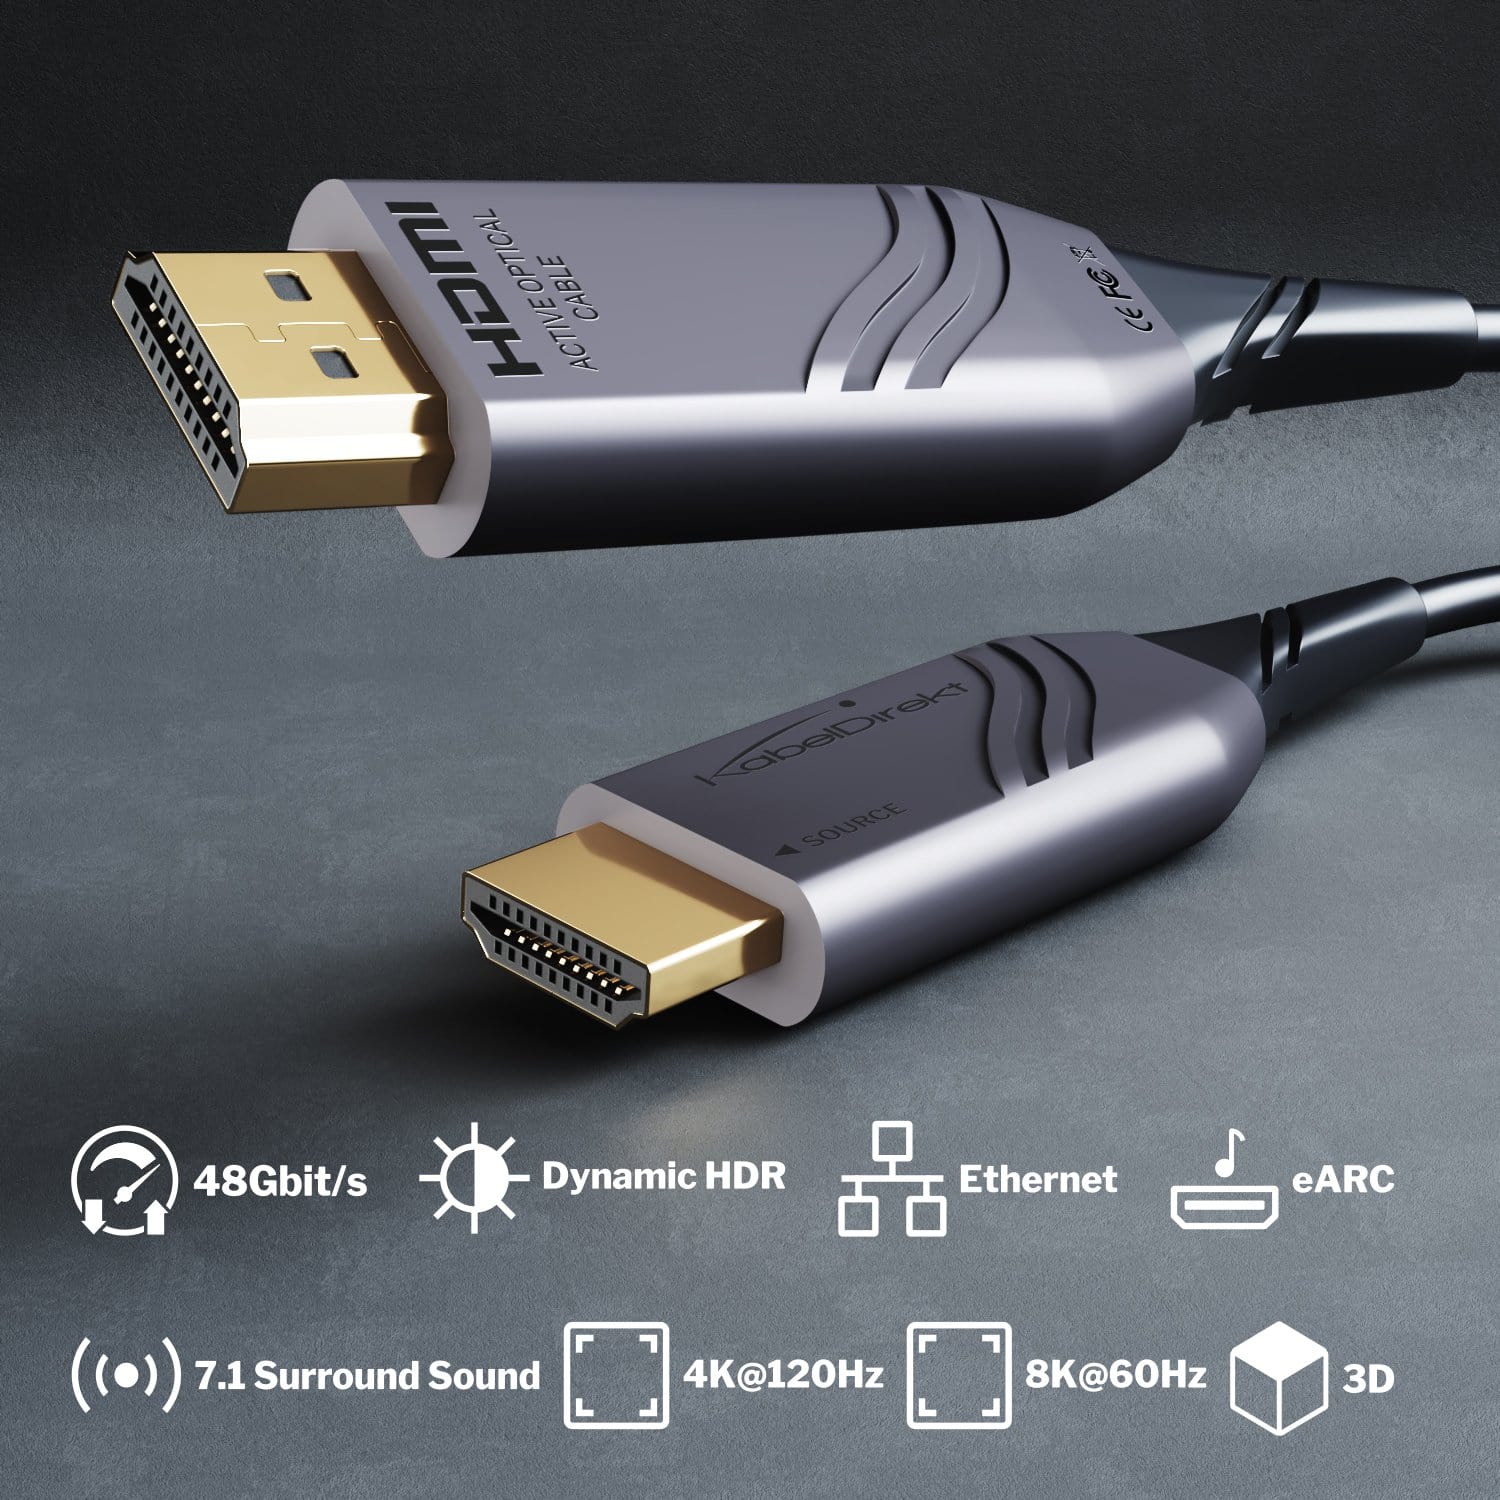 High-speed HDMI 2.0 cable from KabelDirekt – With Ethernet, 4K/8K,  3d-ready, ARC, HDR – blue